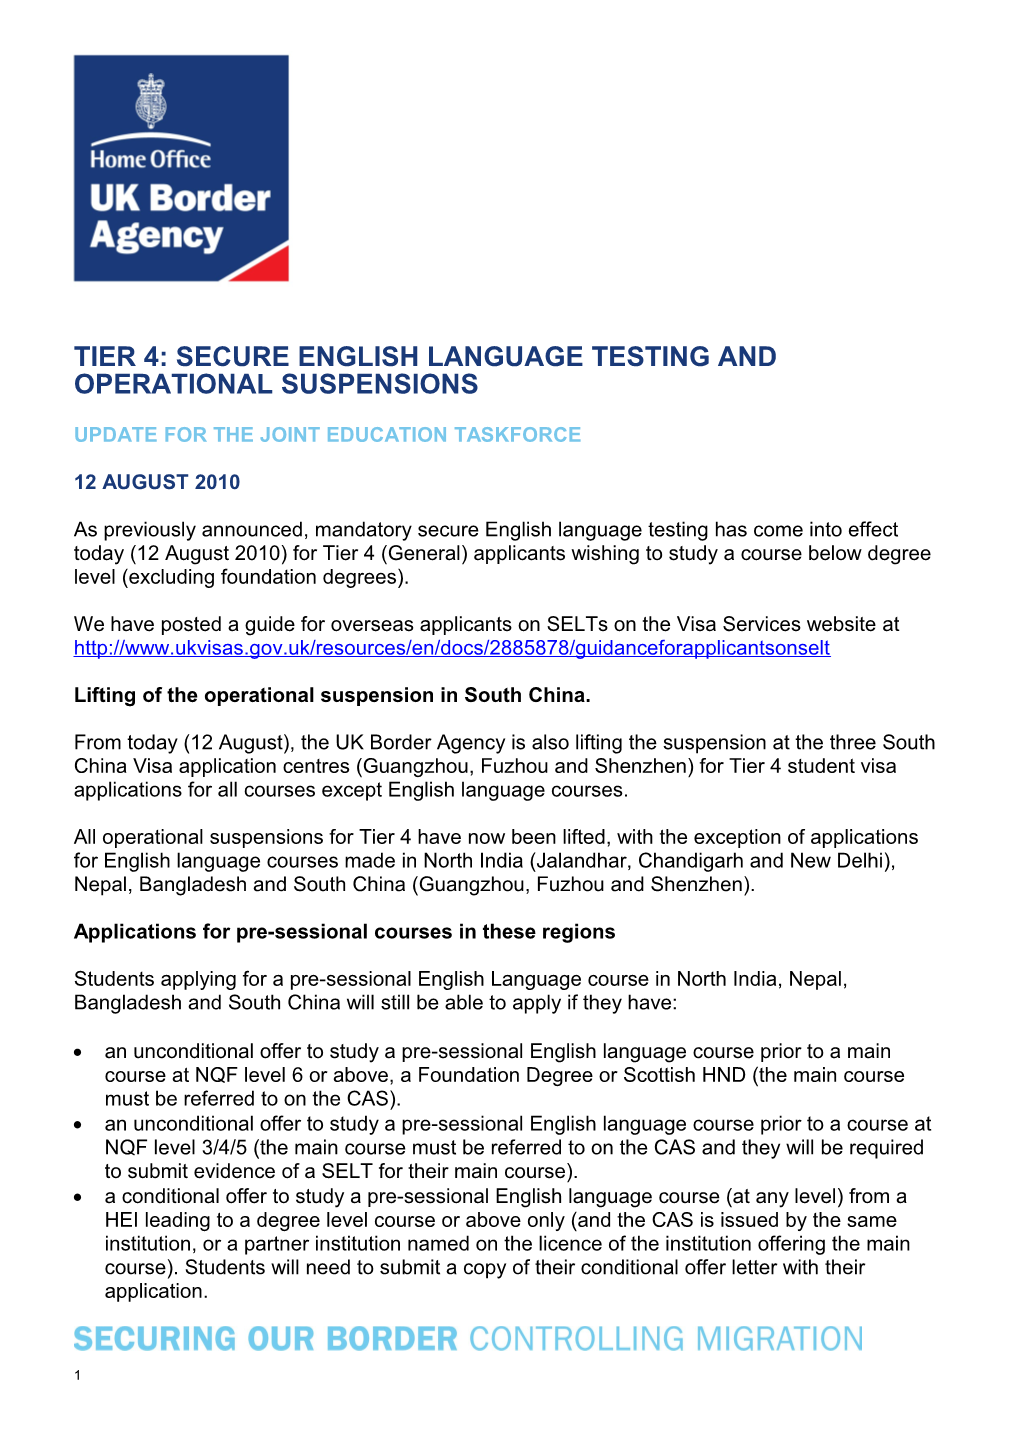 Tier 4: Secure English Language Testing and Operational Suspensions